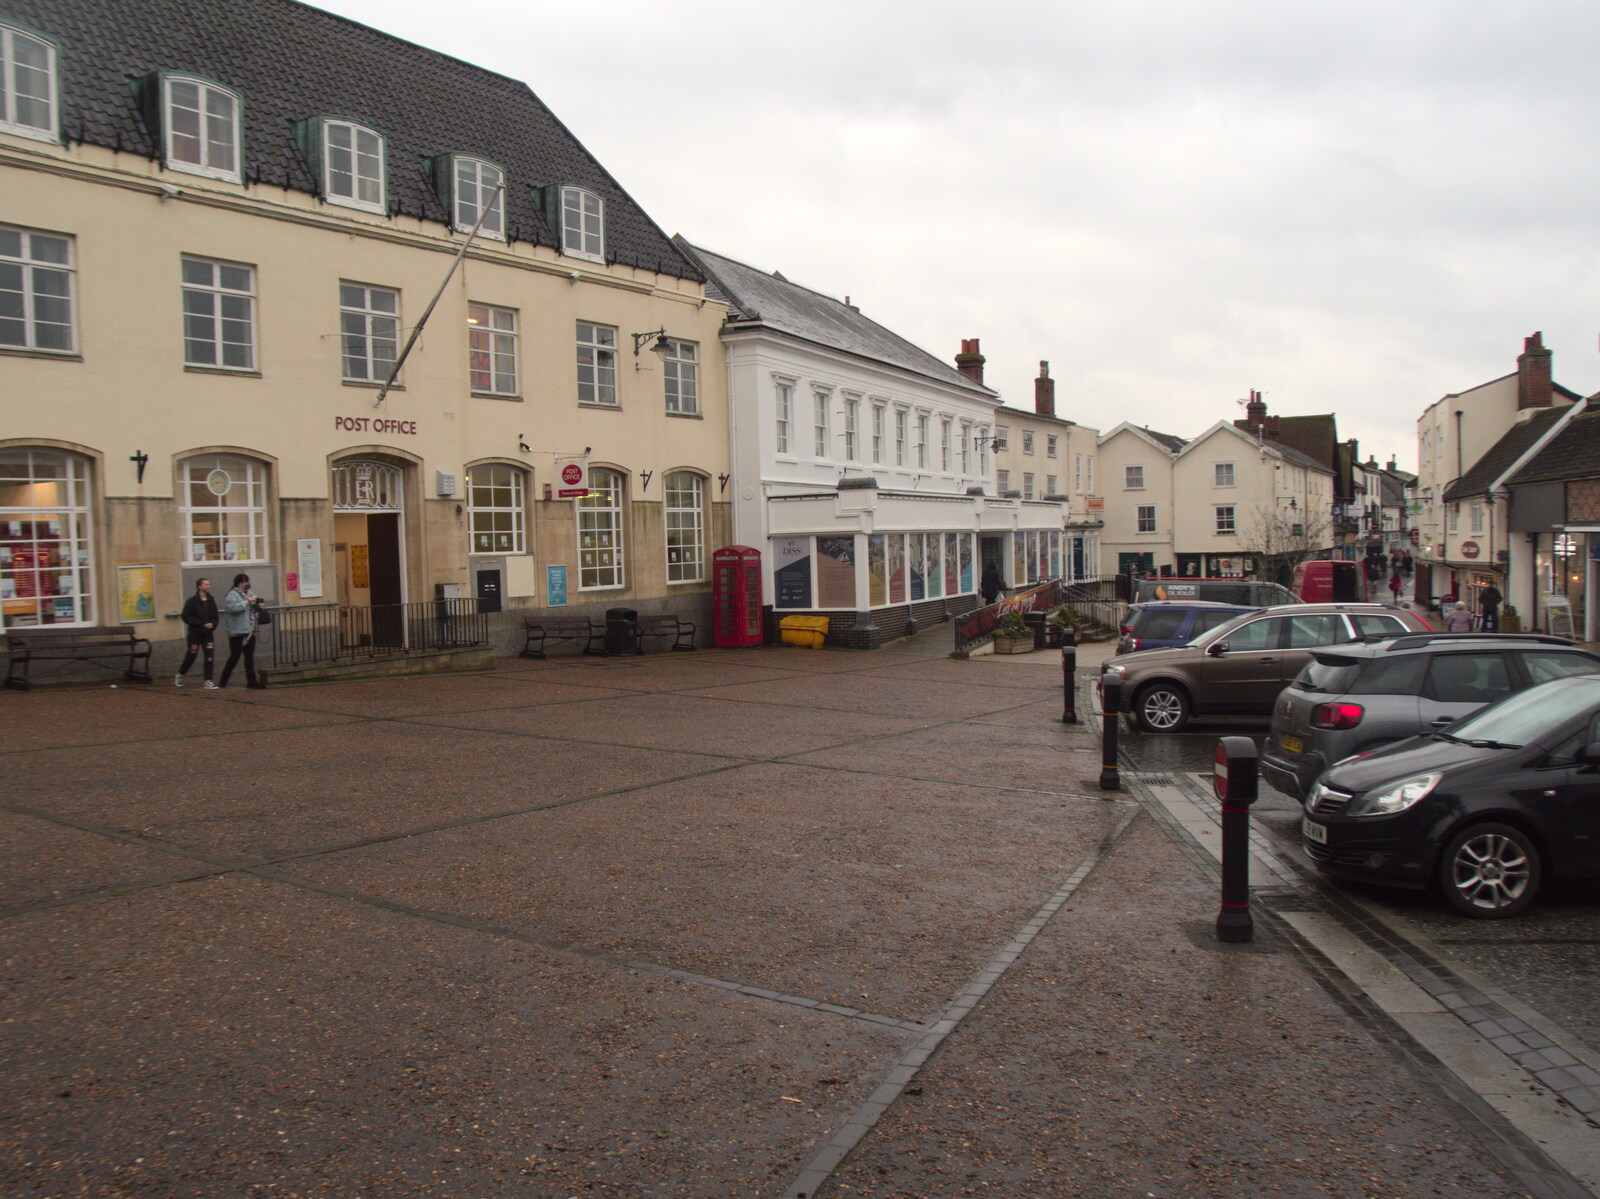 Diss is fairly quiet again in Lockdown 2 from Pre-Lockdown in Station 119, Eye, Suffolk - 4th November 2020